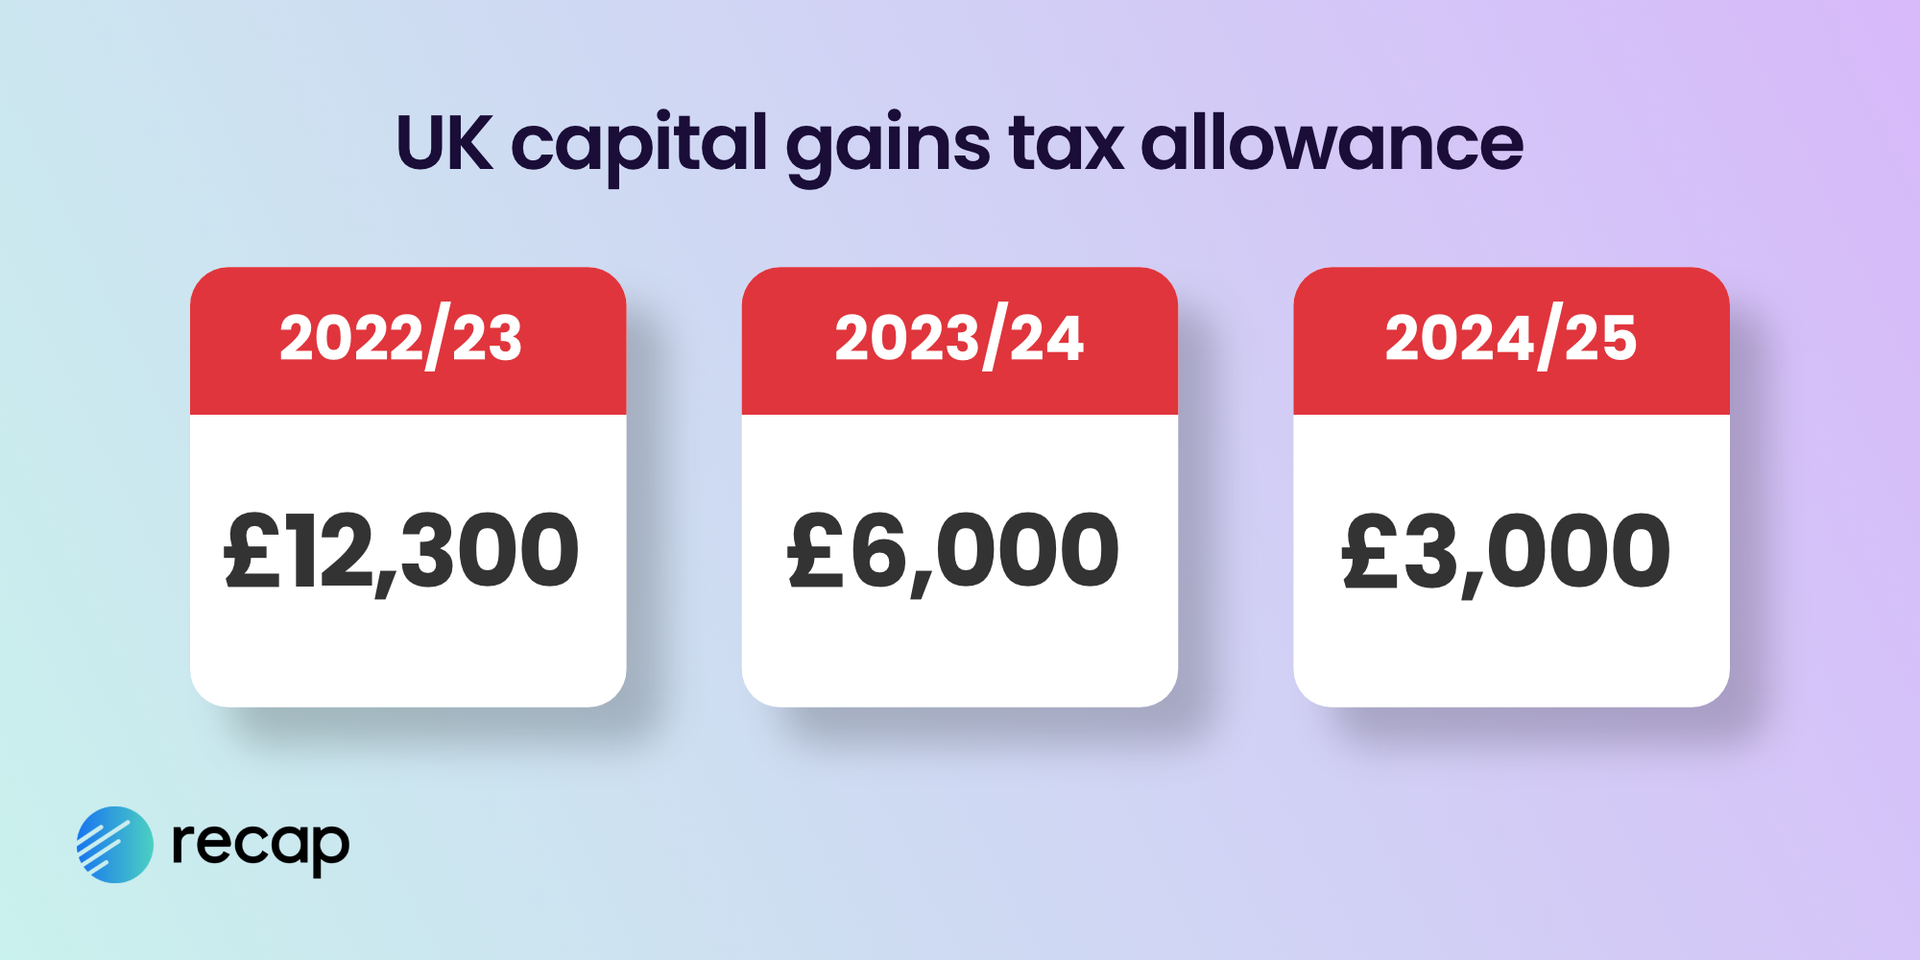 Illustration showing the UK capital gains tax allowance for tax year 2022/23 (£12,300), 2023/24 (£6,000) and 2024/25 (£3,000).